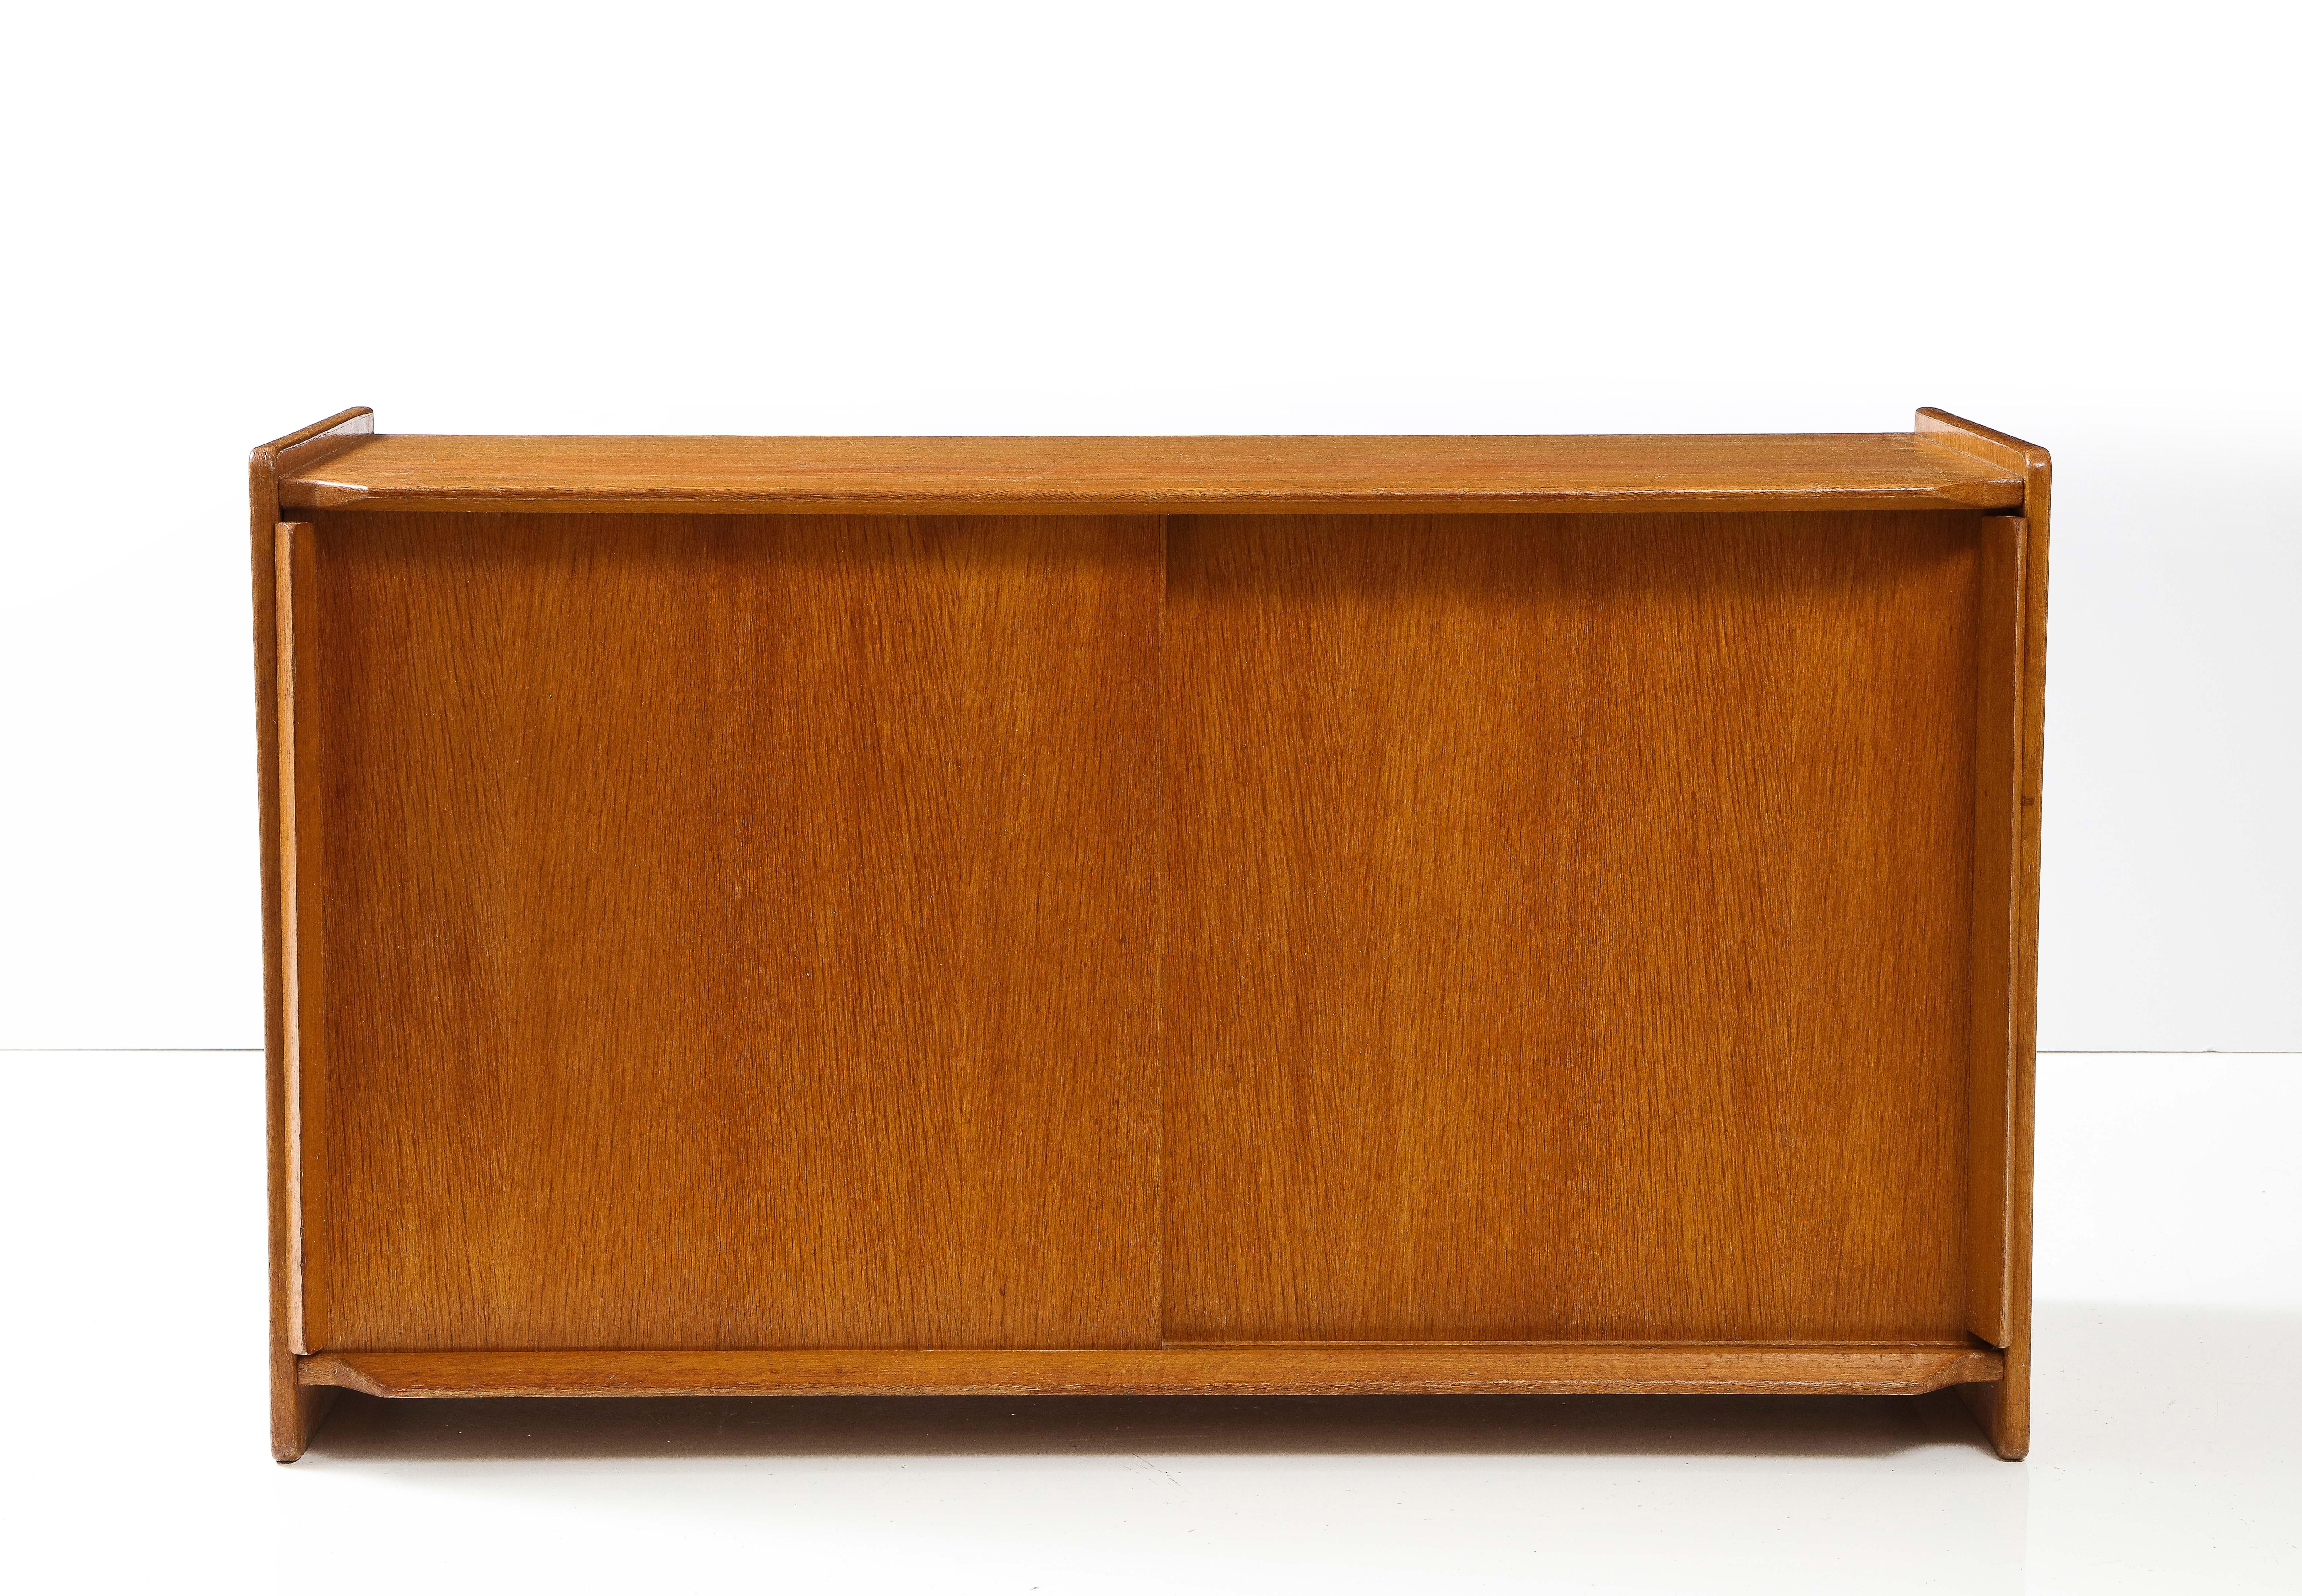 Solid Oak French Modernist low sideboard, France, c. 1960
Oak, Note: Interior shelf with small drawer
Measures: H: 28 D: 17.5 W: 49 inches.